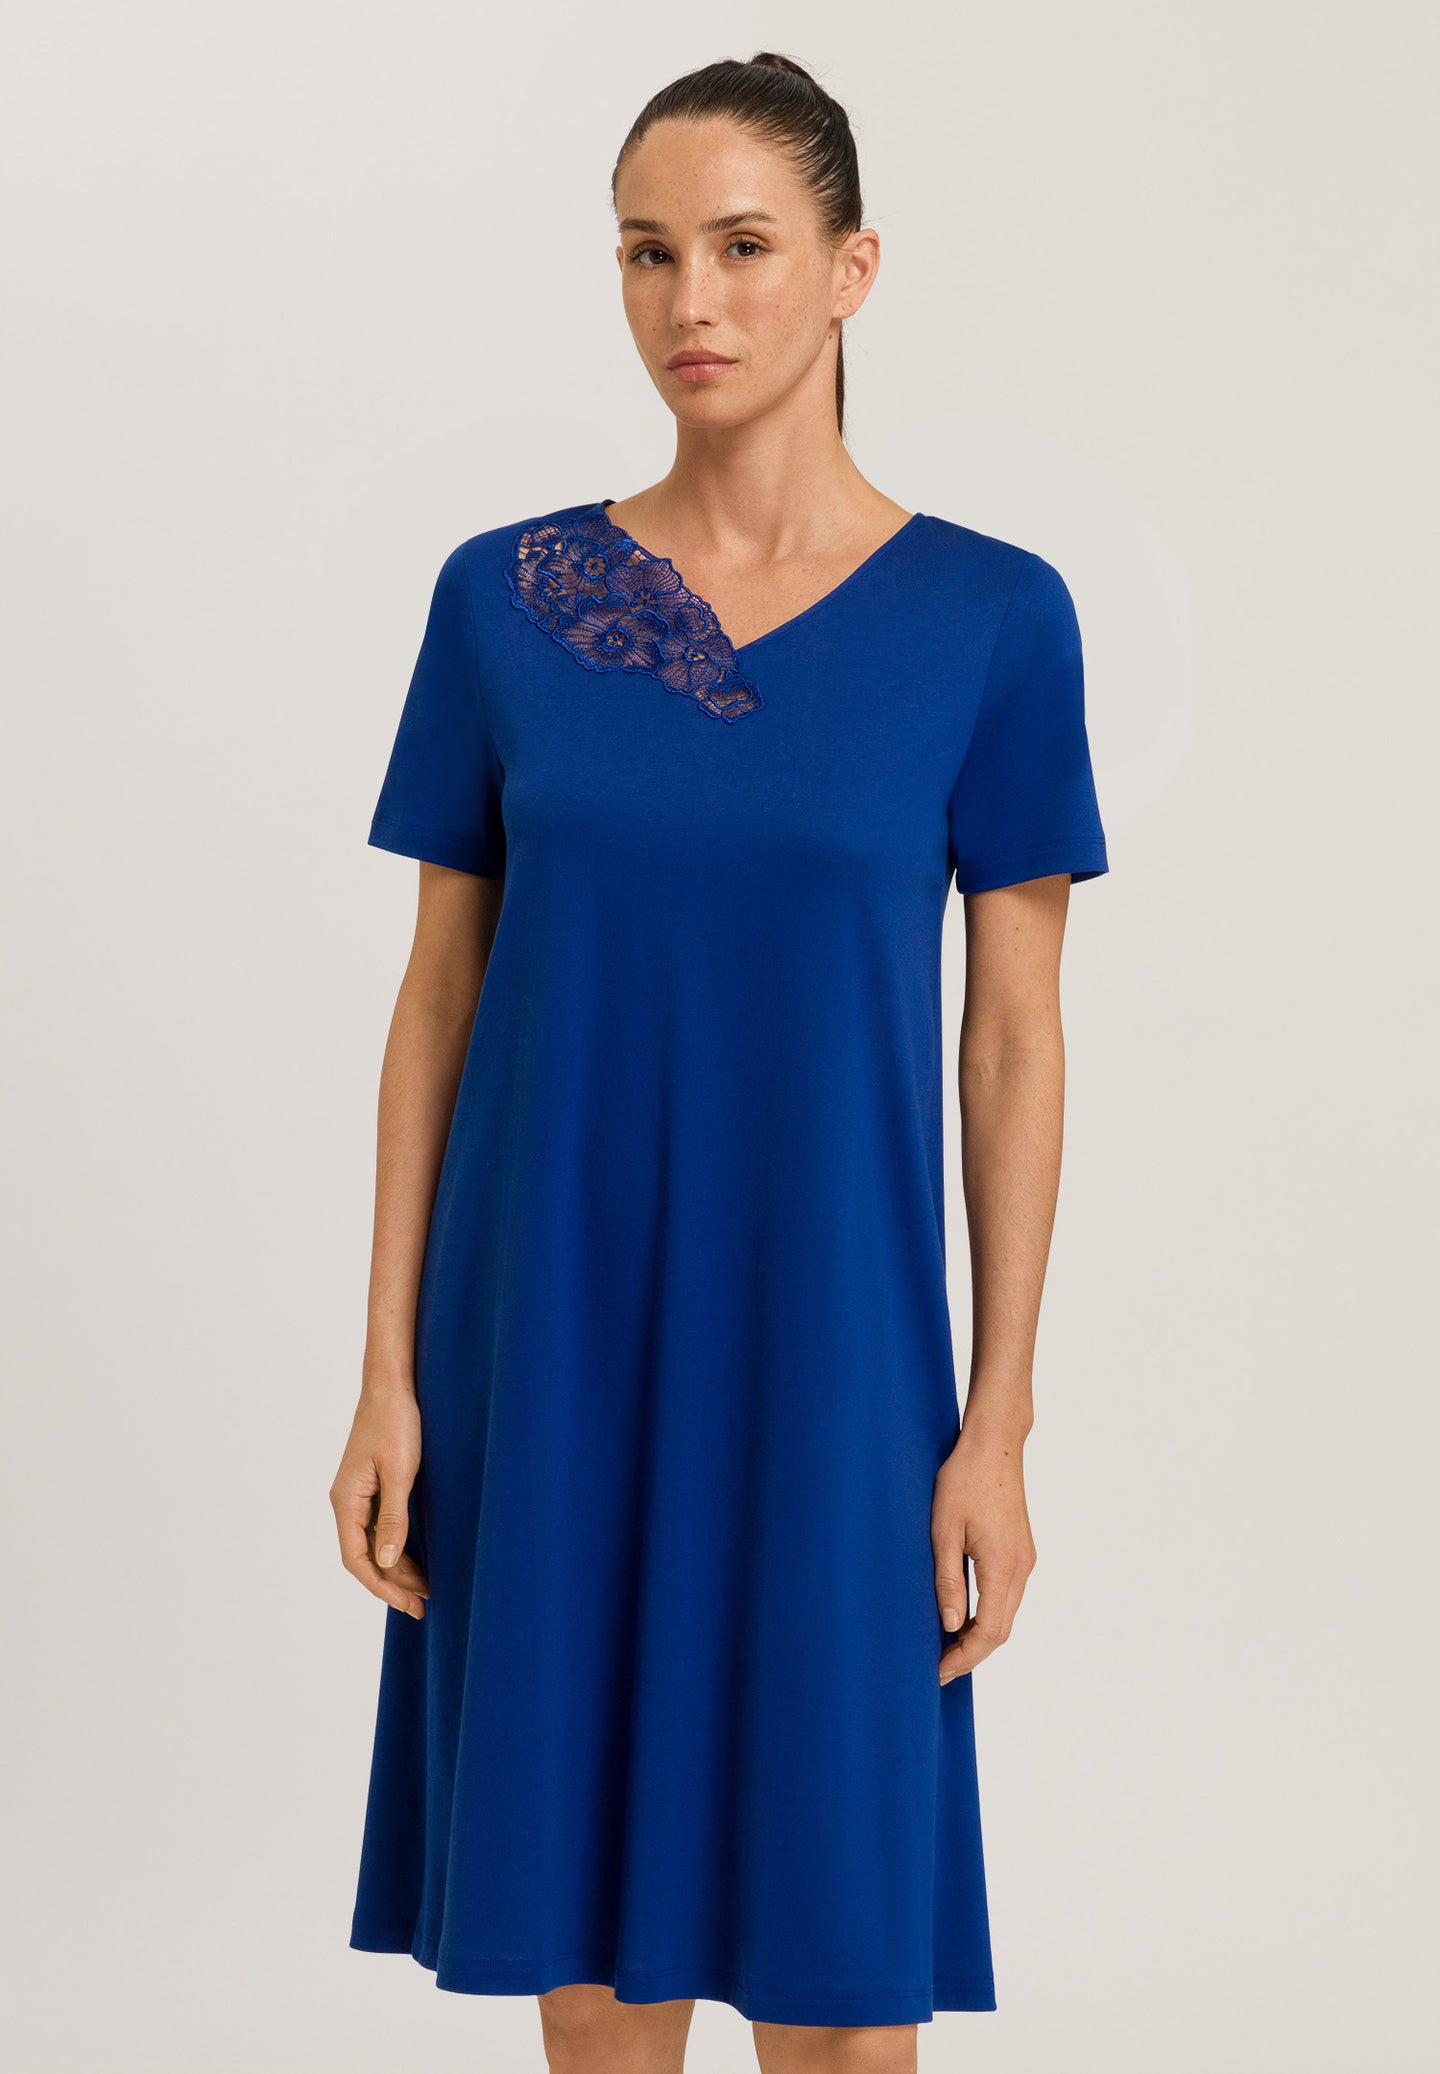 Made from 100% soft mercerised knitted cotton. This is a lovely Short Sleeve nightgown. Rounded lace detail at the neck. Light and airy to wear in bed.  Deliciously comfortable for sleeping and lounging.  Length: 110cm  Composition: 100% Pure Cotton 100% Polyester Lace. Indigo Blue..